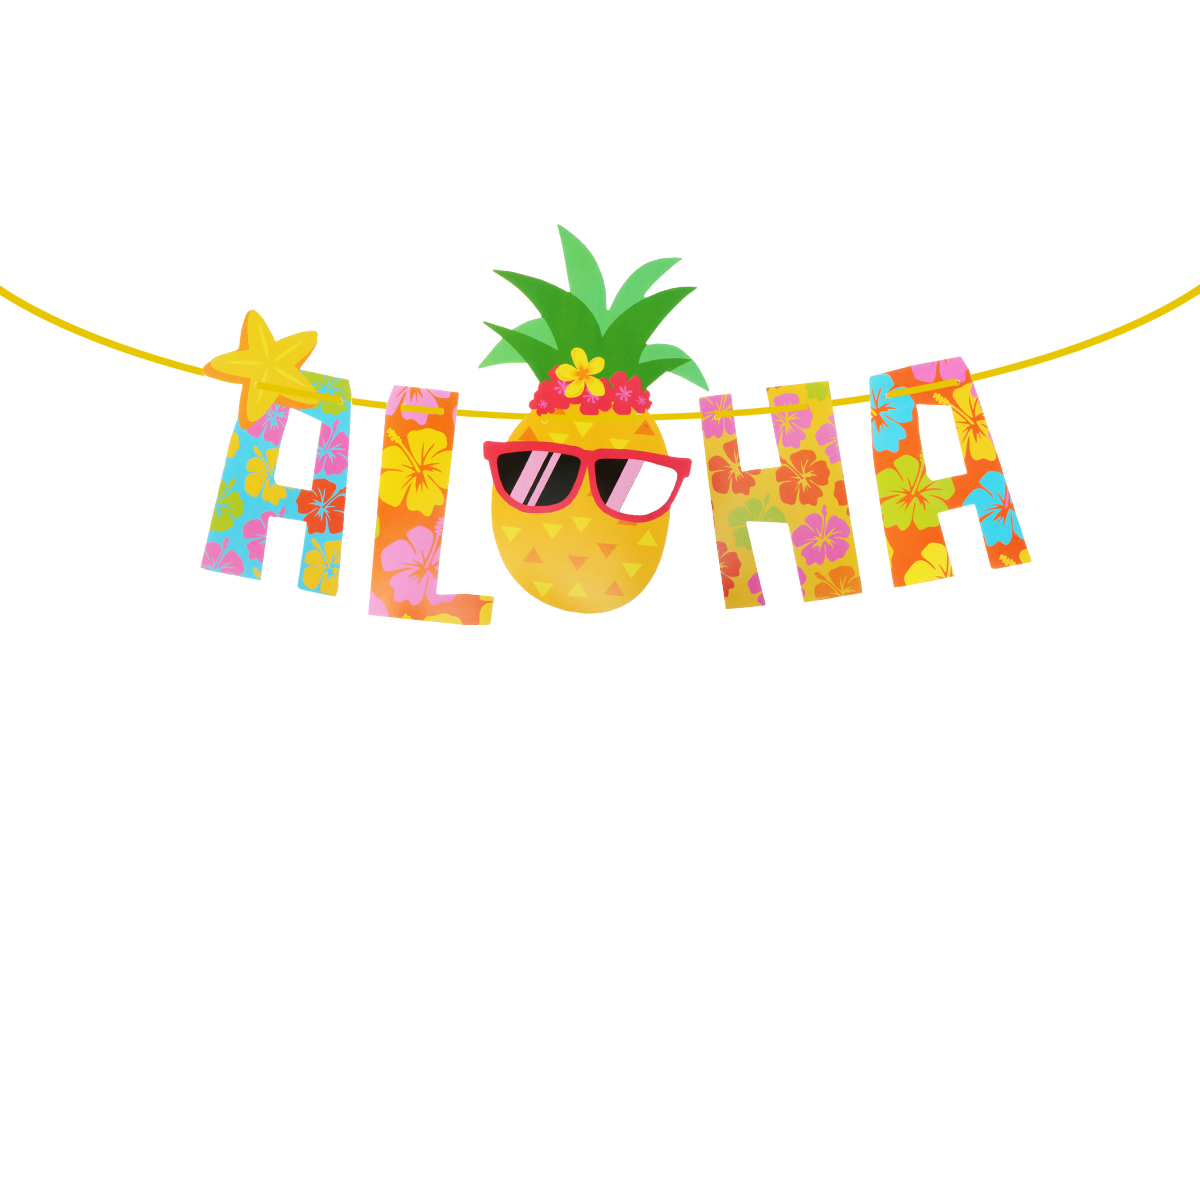 2.2 Meters Luau Party Banner Aloha Hawaii Theme Party Decoration Supplies Photography Props - image 1 of 8